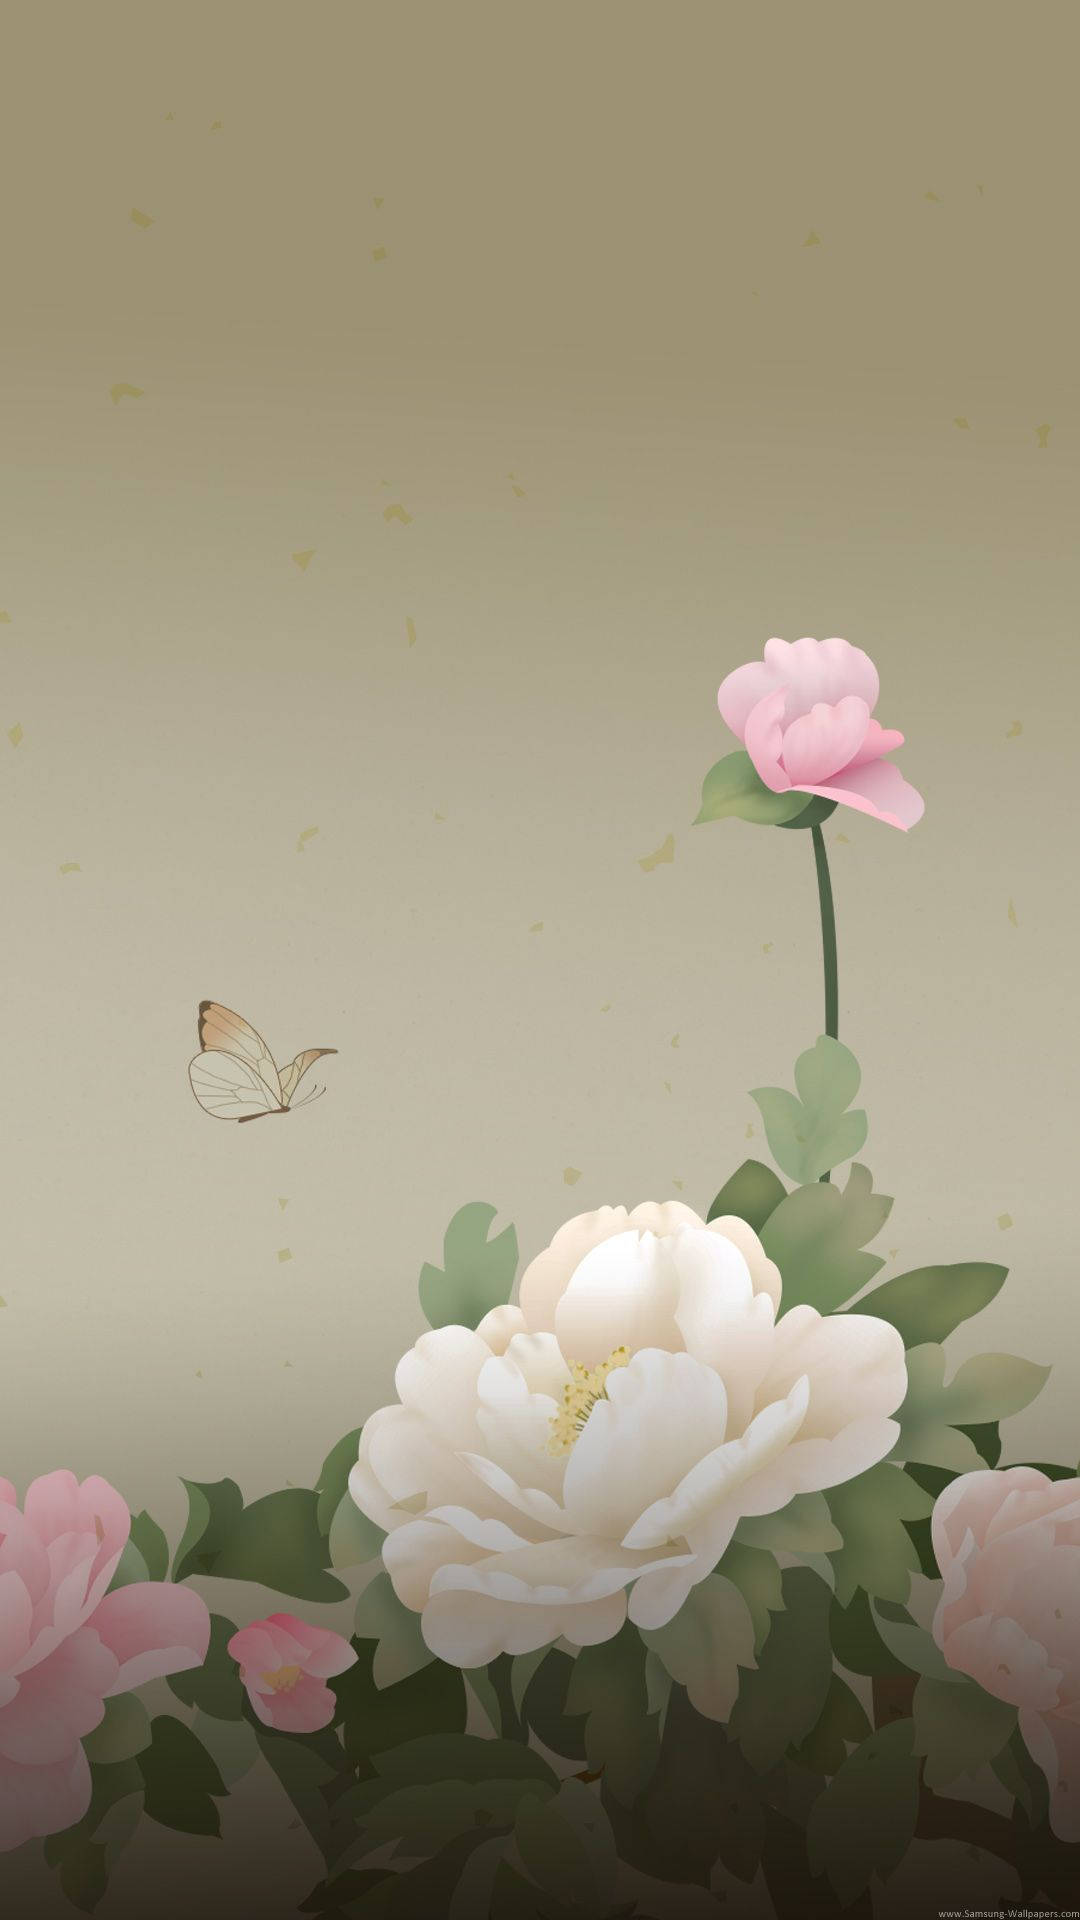 Peony Art With Butterfly Wallpaper